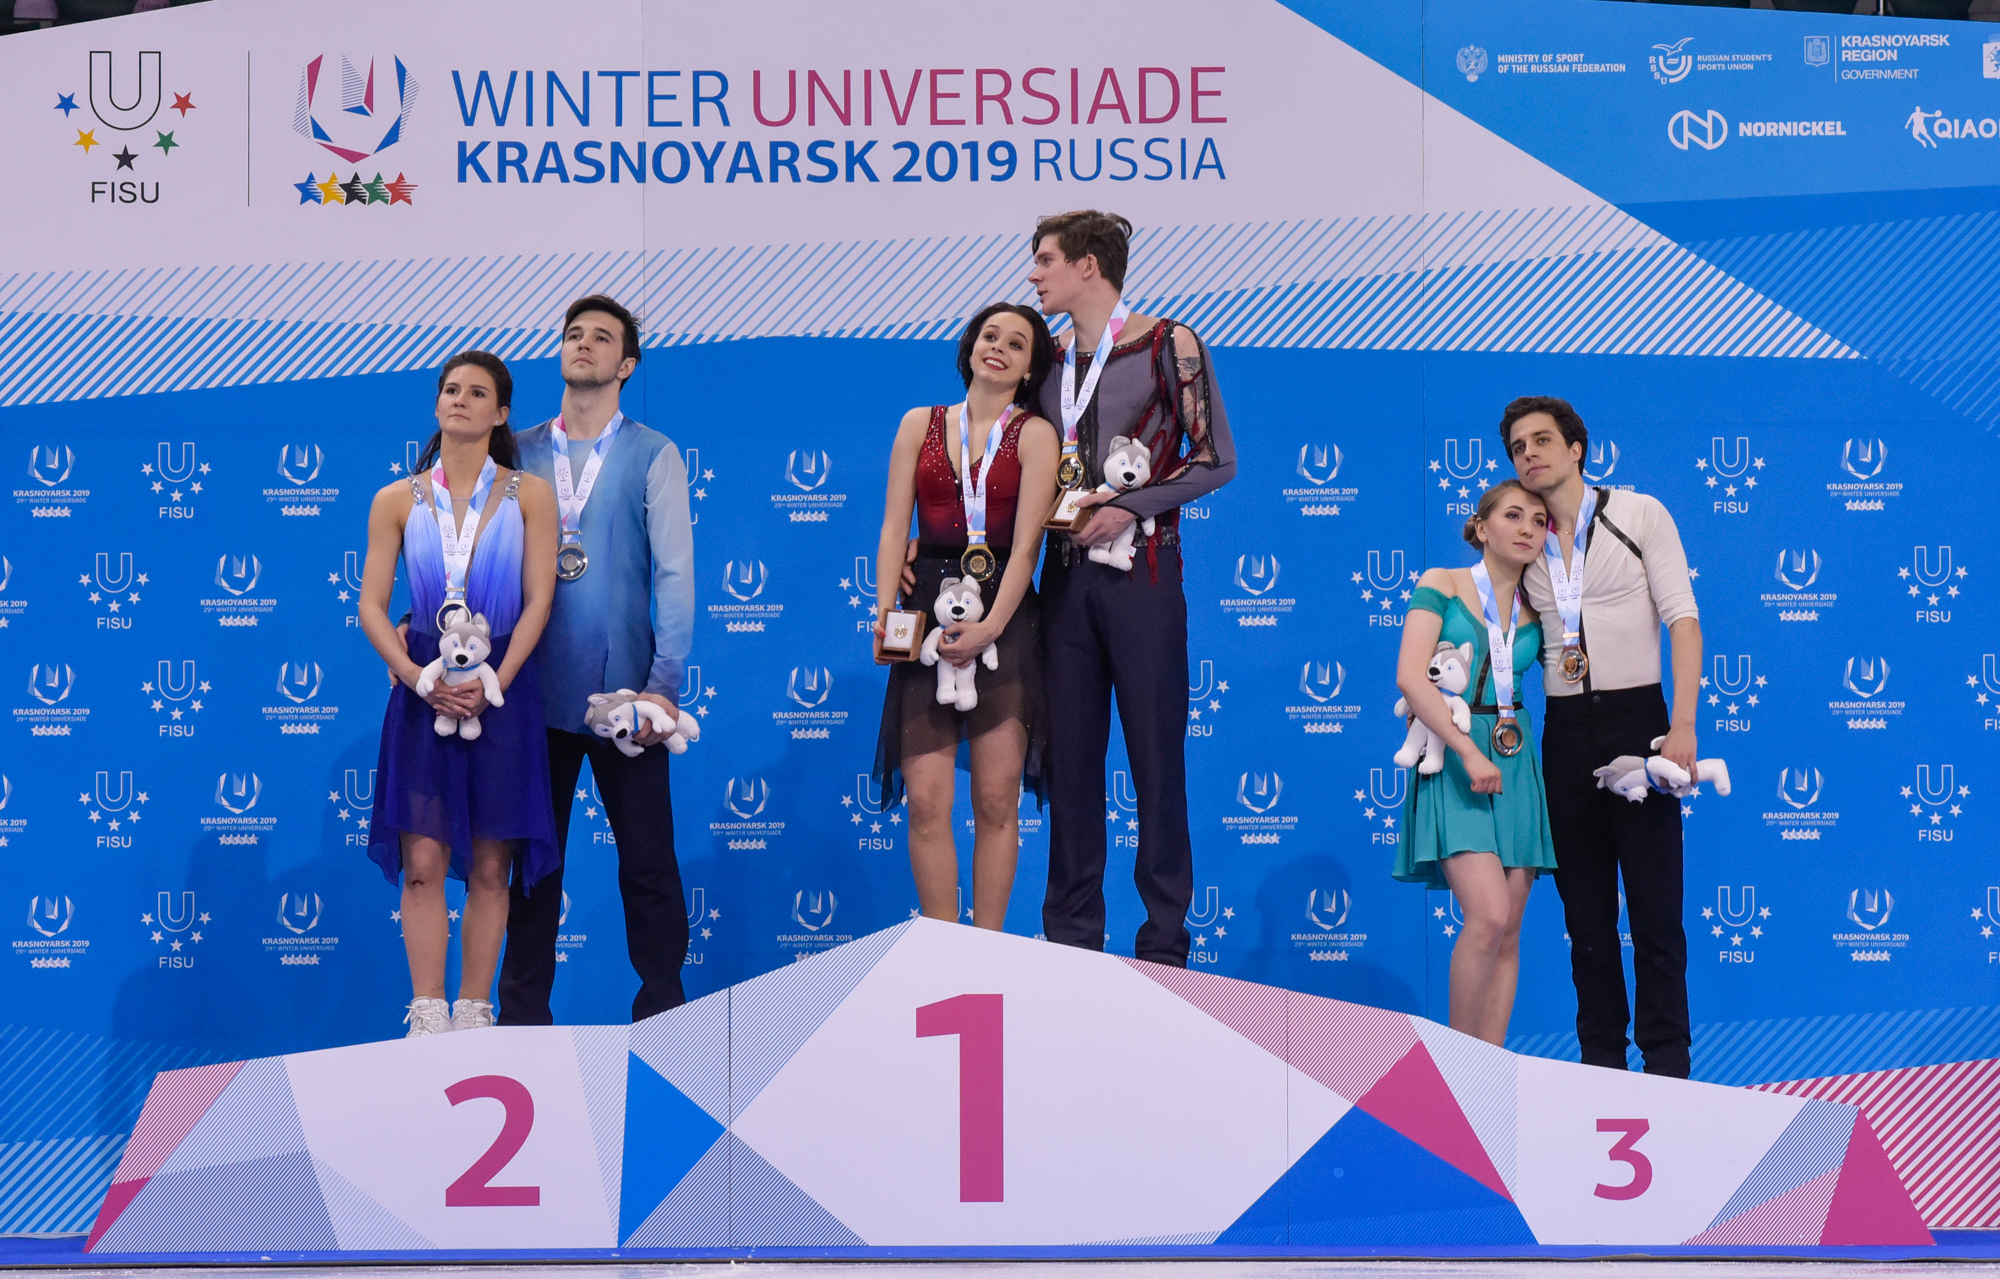 Russia celebrated success in the ice dance competition ©Krasnoyarsk 2019